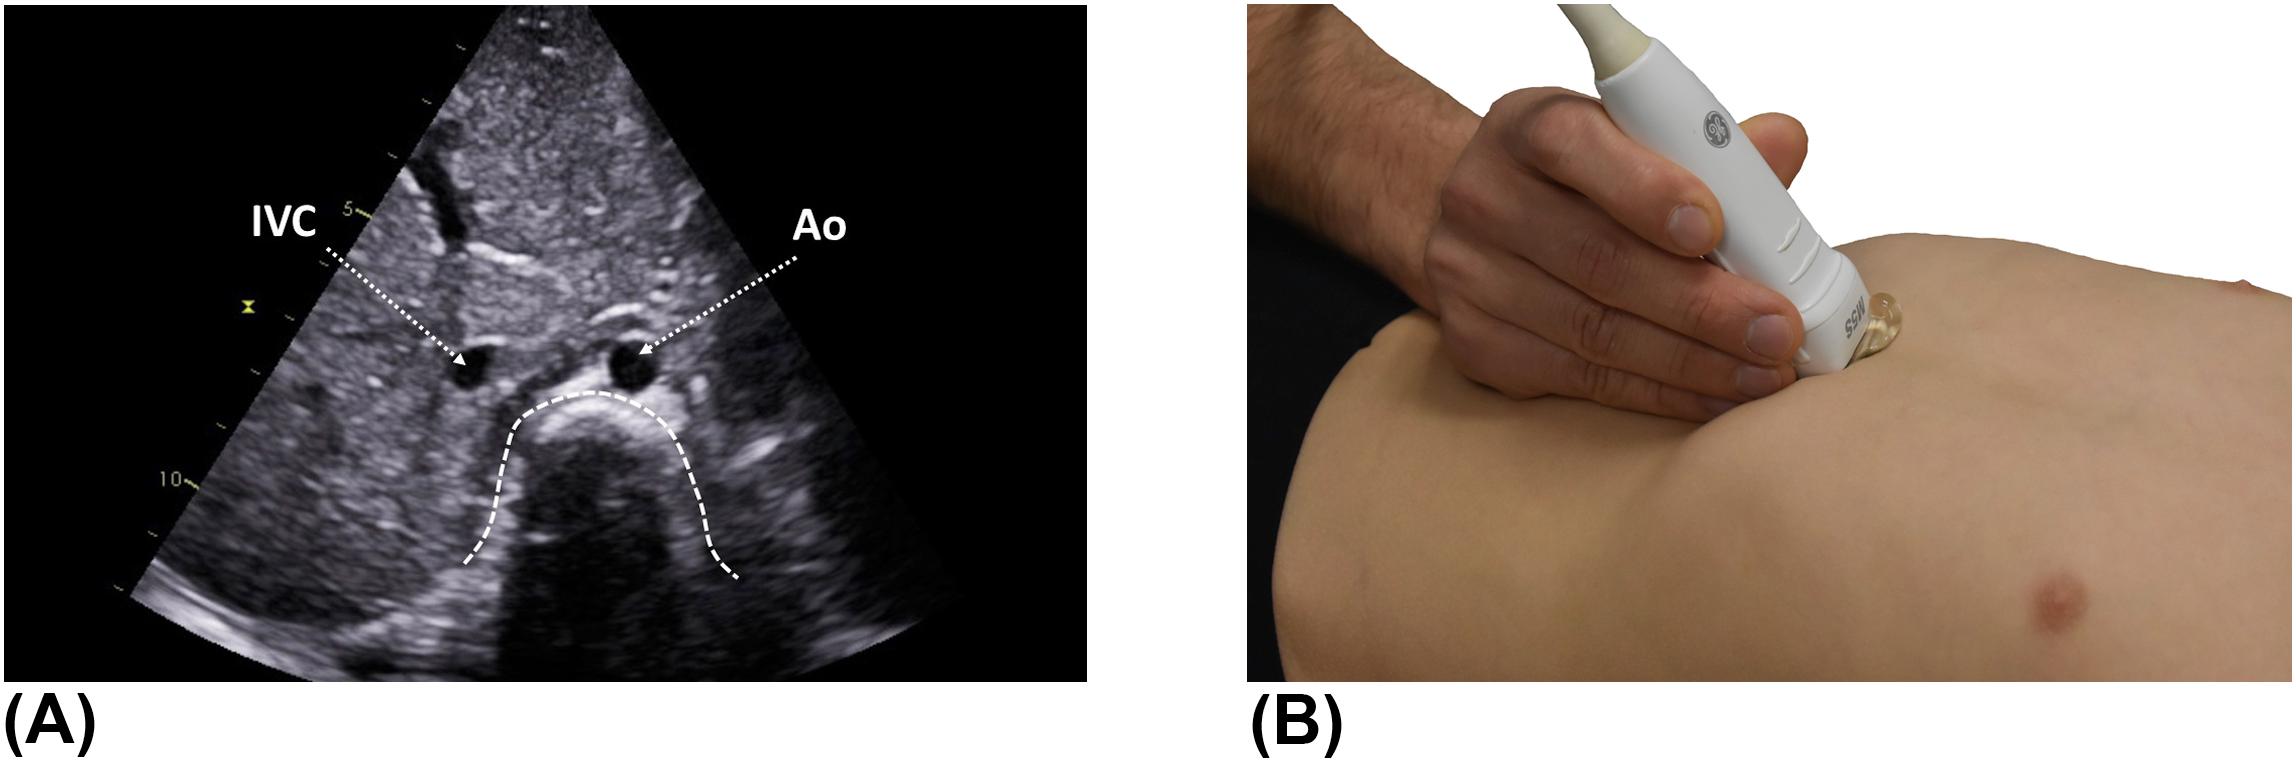 Figure 2, (A) Subcostal “situs” view (transverse plane). In normal abdominal situs, the abdominal aorta is to the left and the inferior vena cava to the right of the spine. (B) The probe marker is at the 3 o'clock position. Ao , aorta; IVC , inferior vena cava.